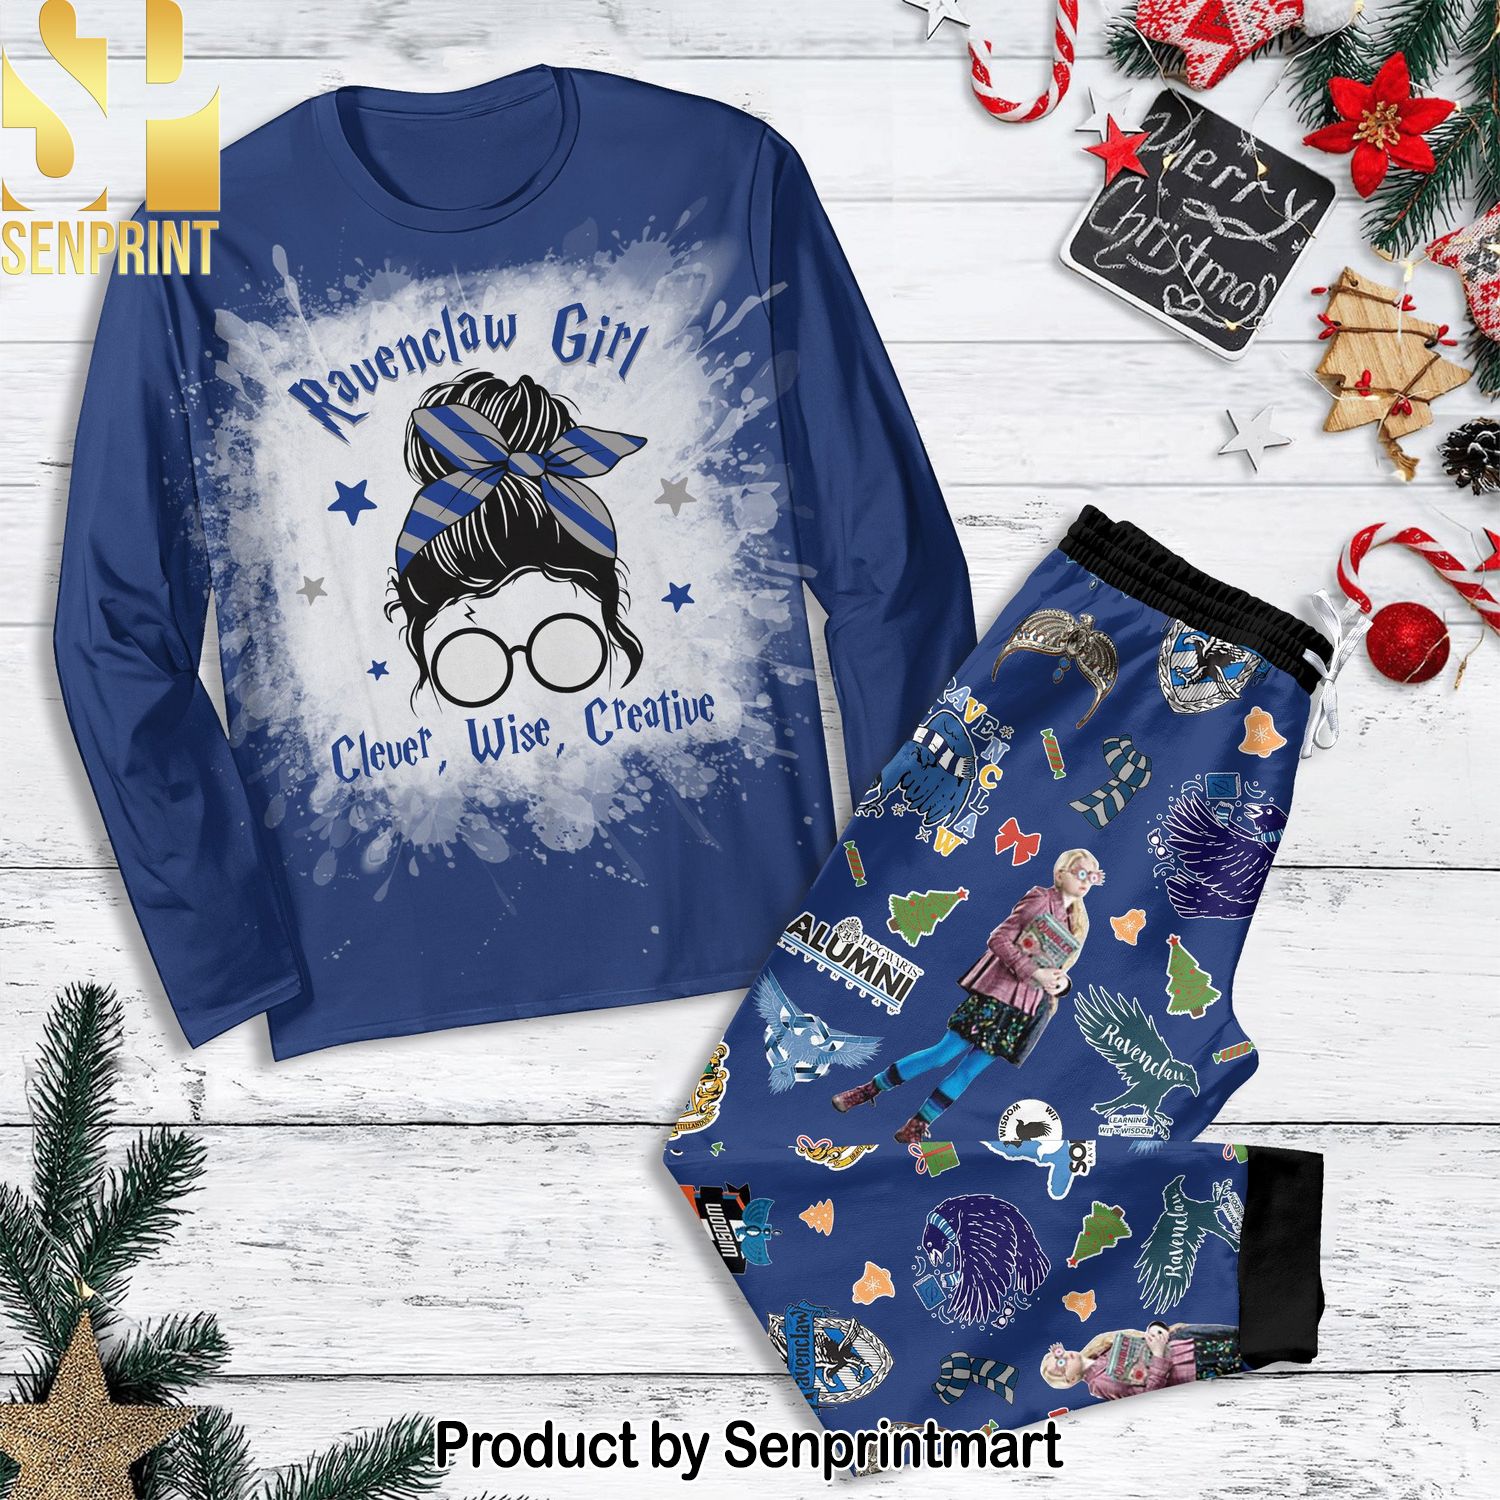 Harry Potter Best Outfit Pajama Sets